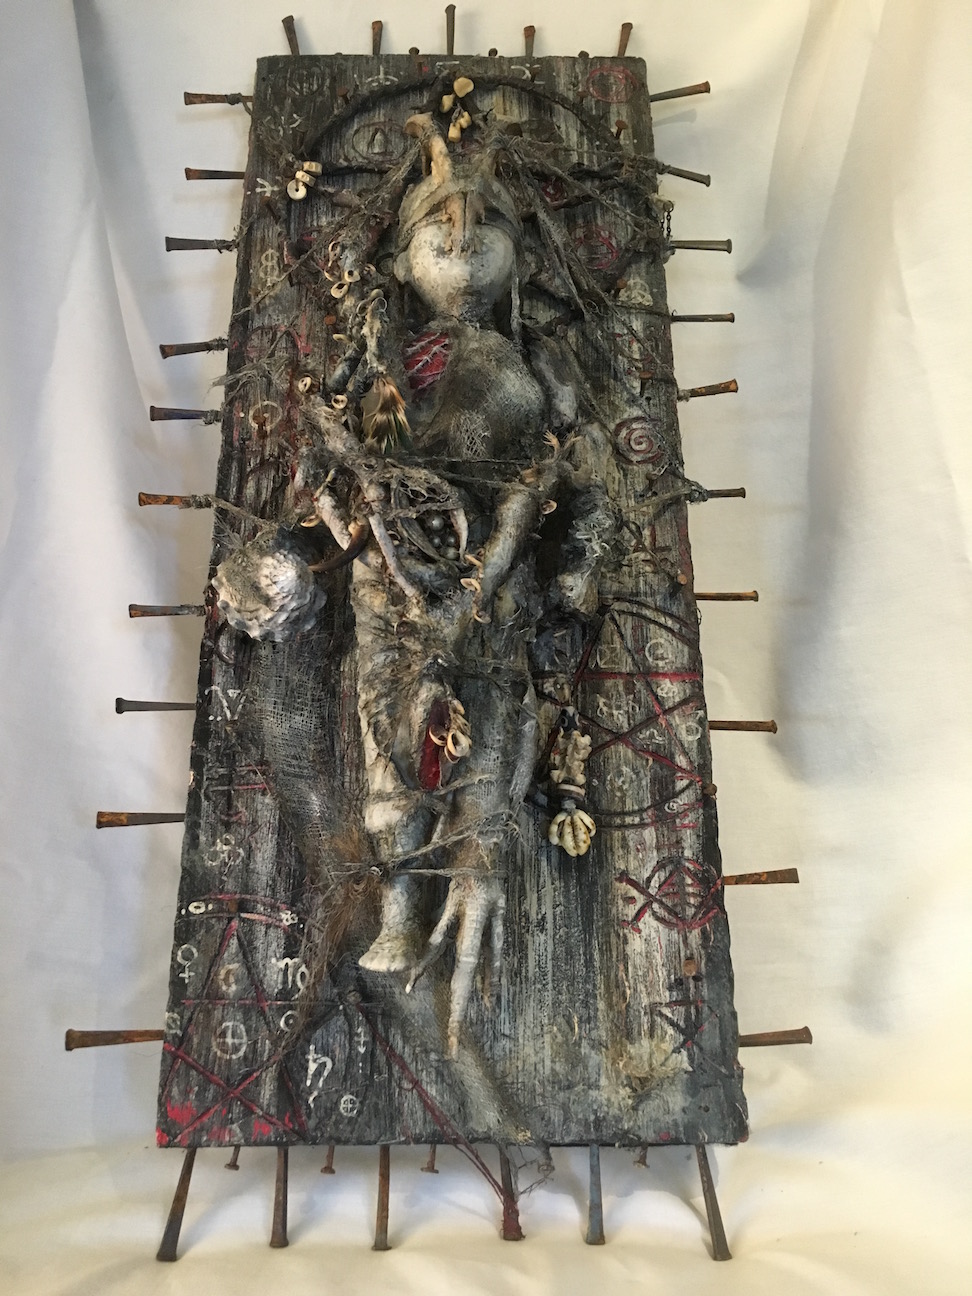 mixed media assemblage plaque hand-painted babydoll with animal bones and pagan symbols